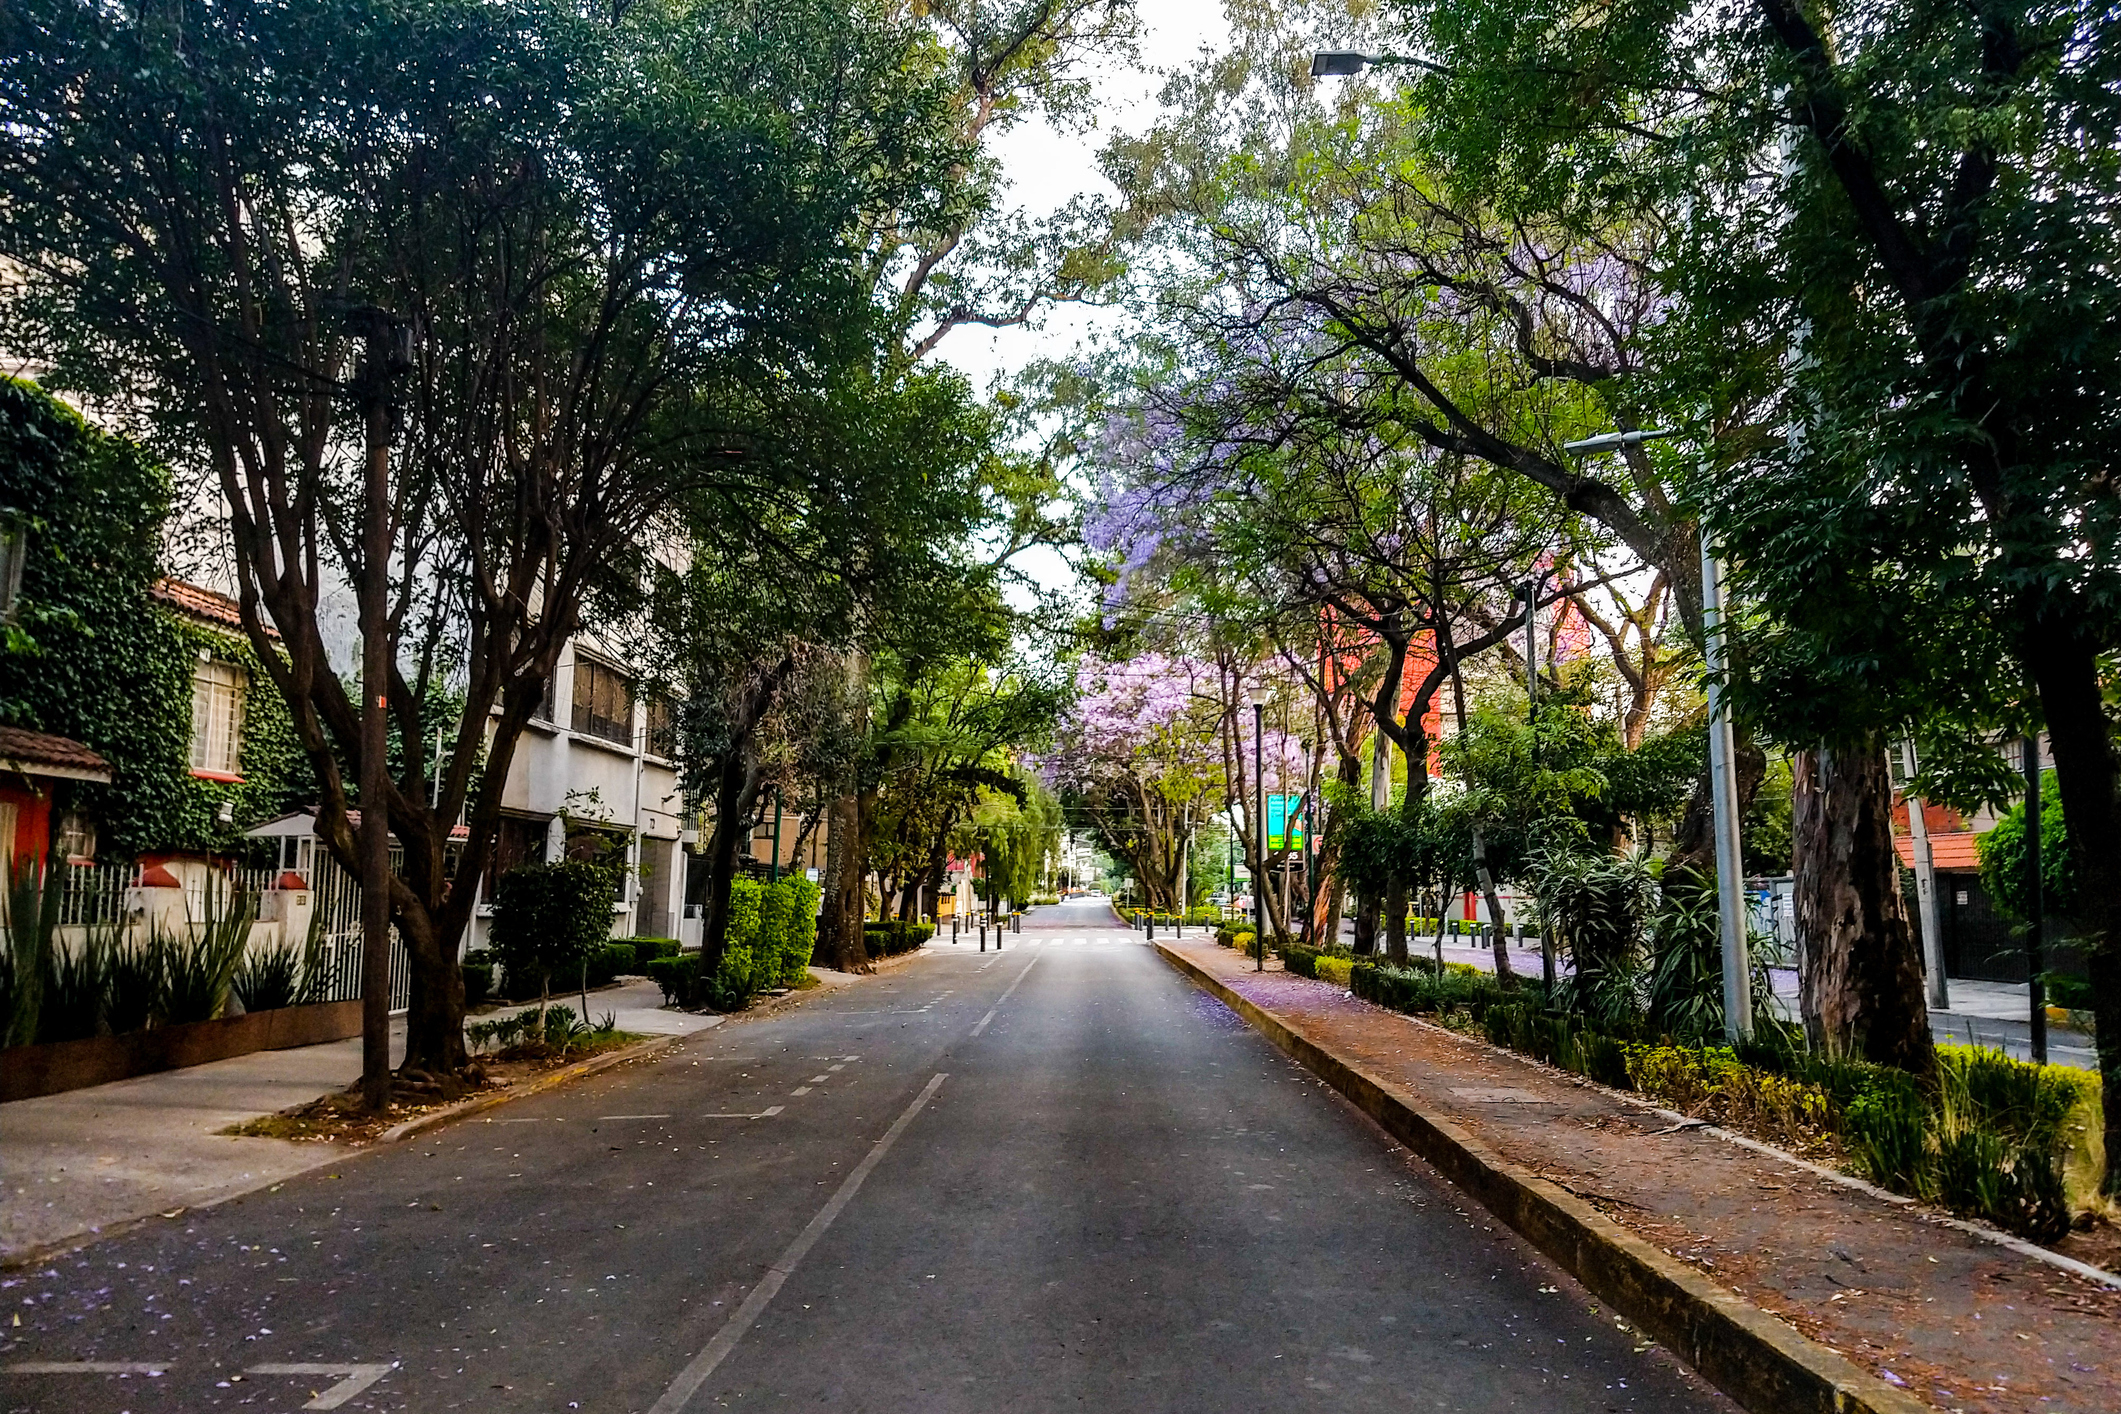 Street lined with trees and residential buildings, some trees have purple flowers. No people visible